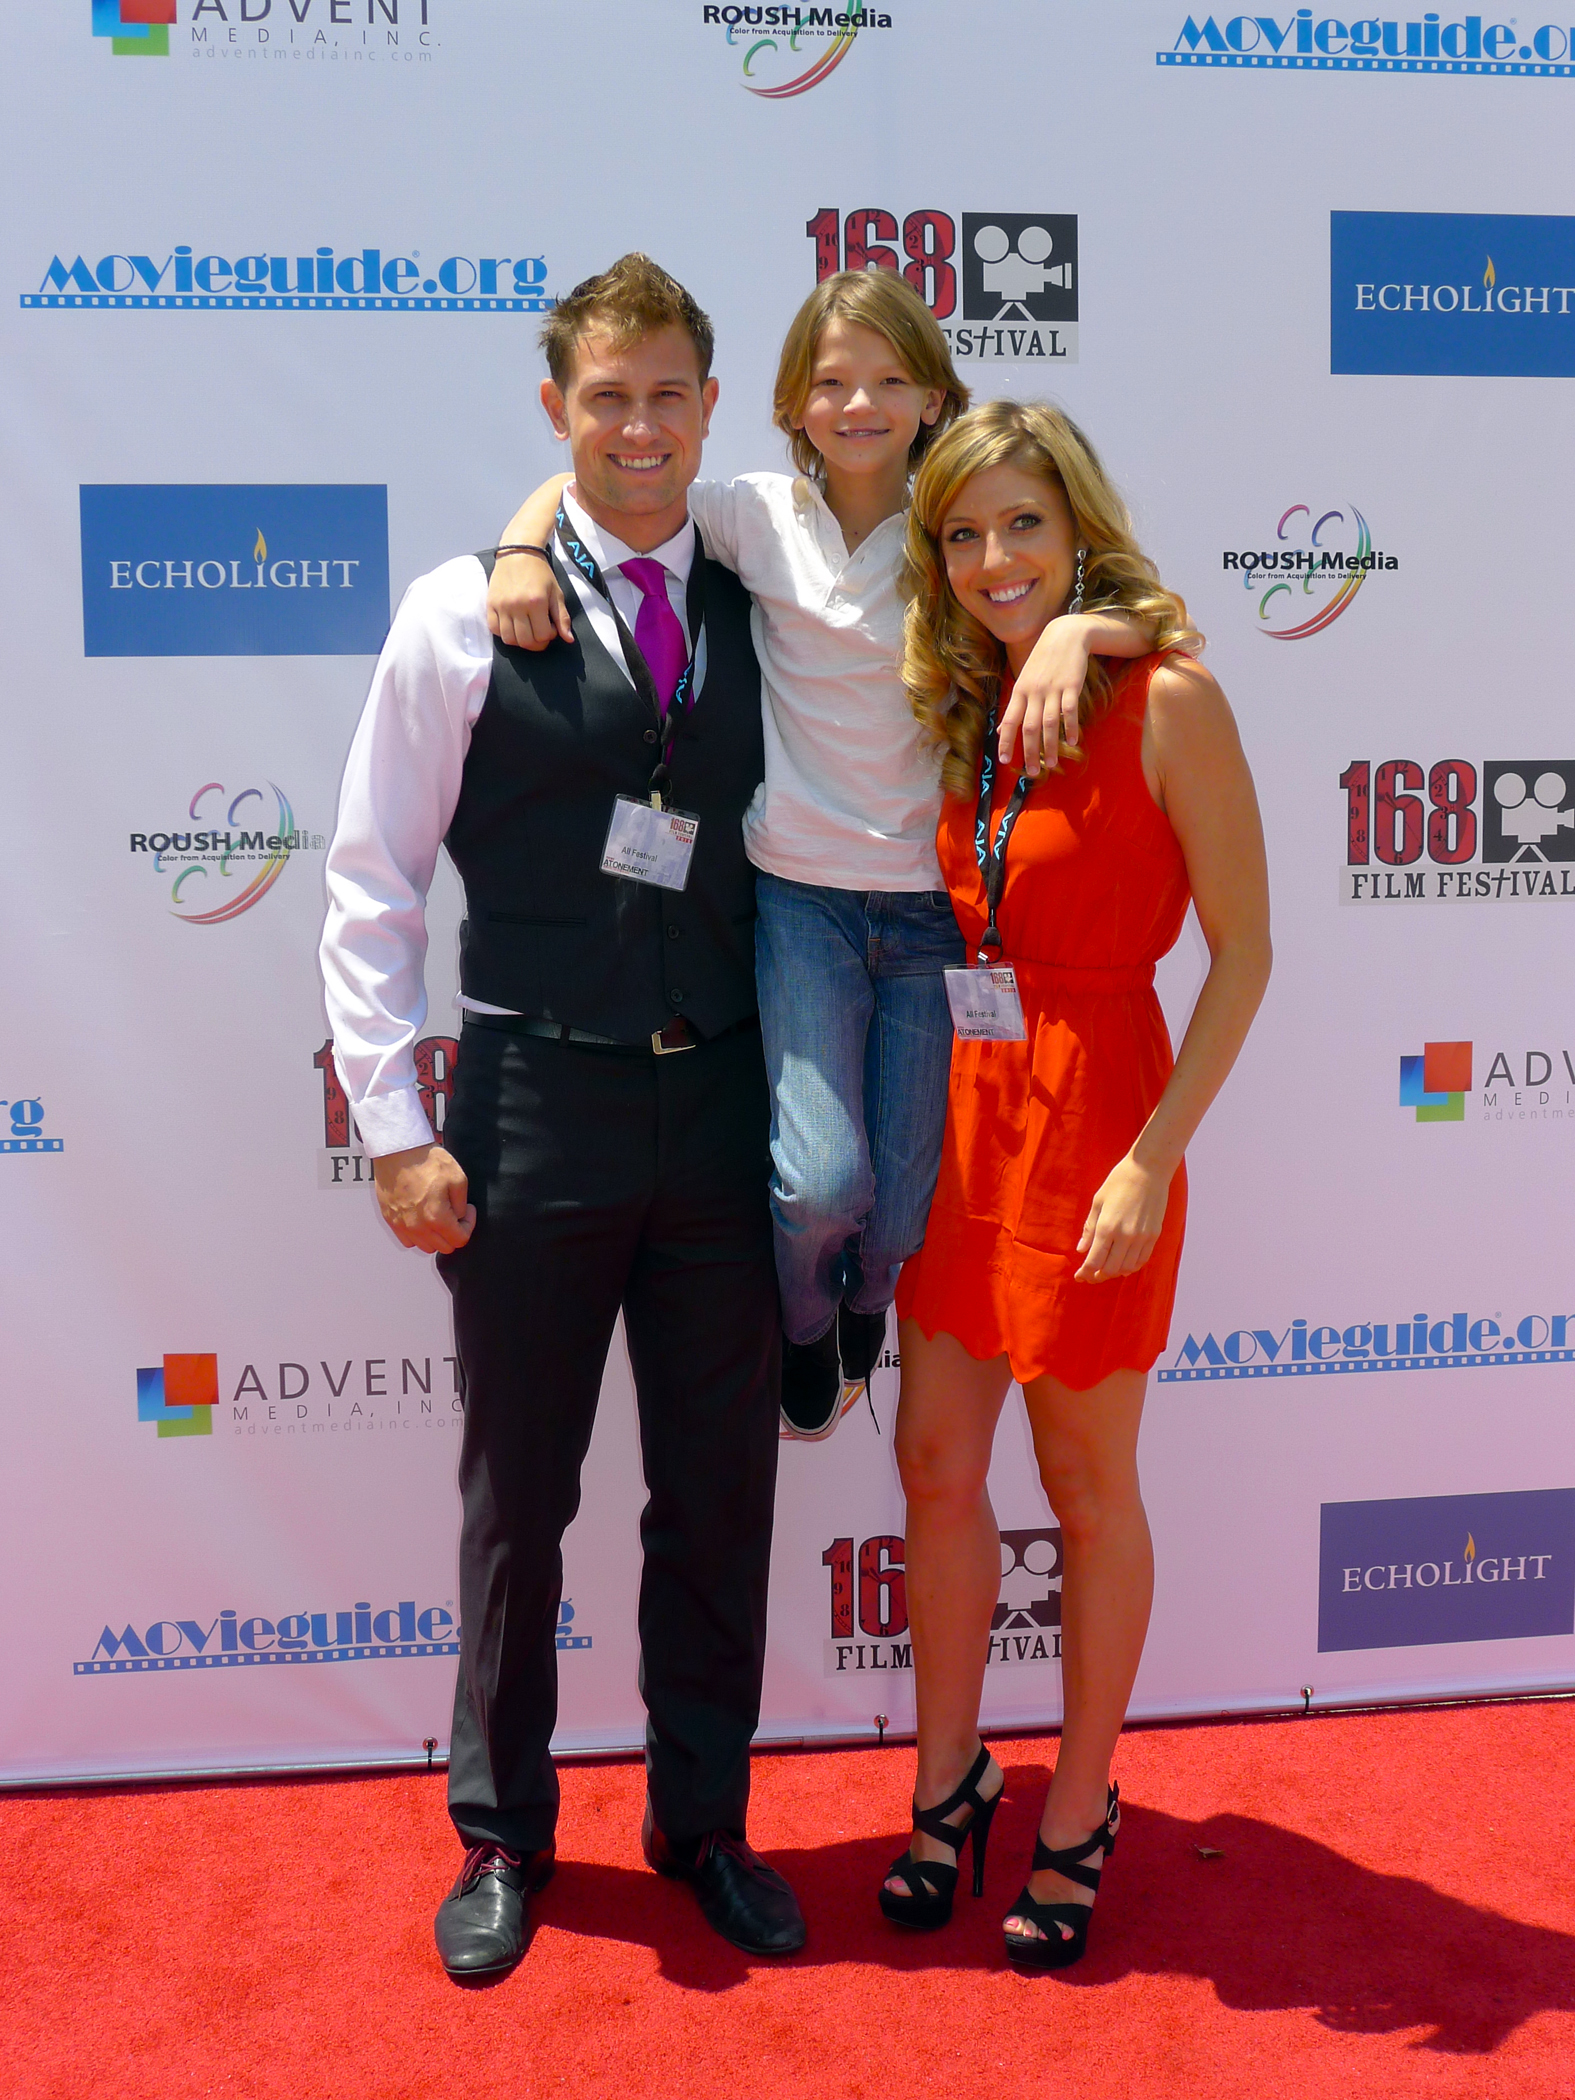 Premiere of The Protagonist, with Jon Robert Hall and Sharelle Smith